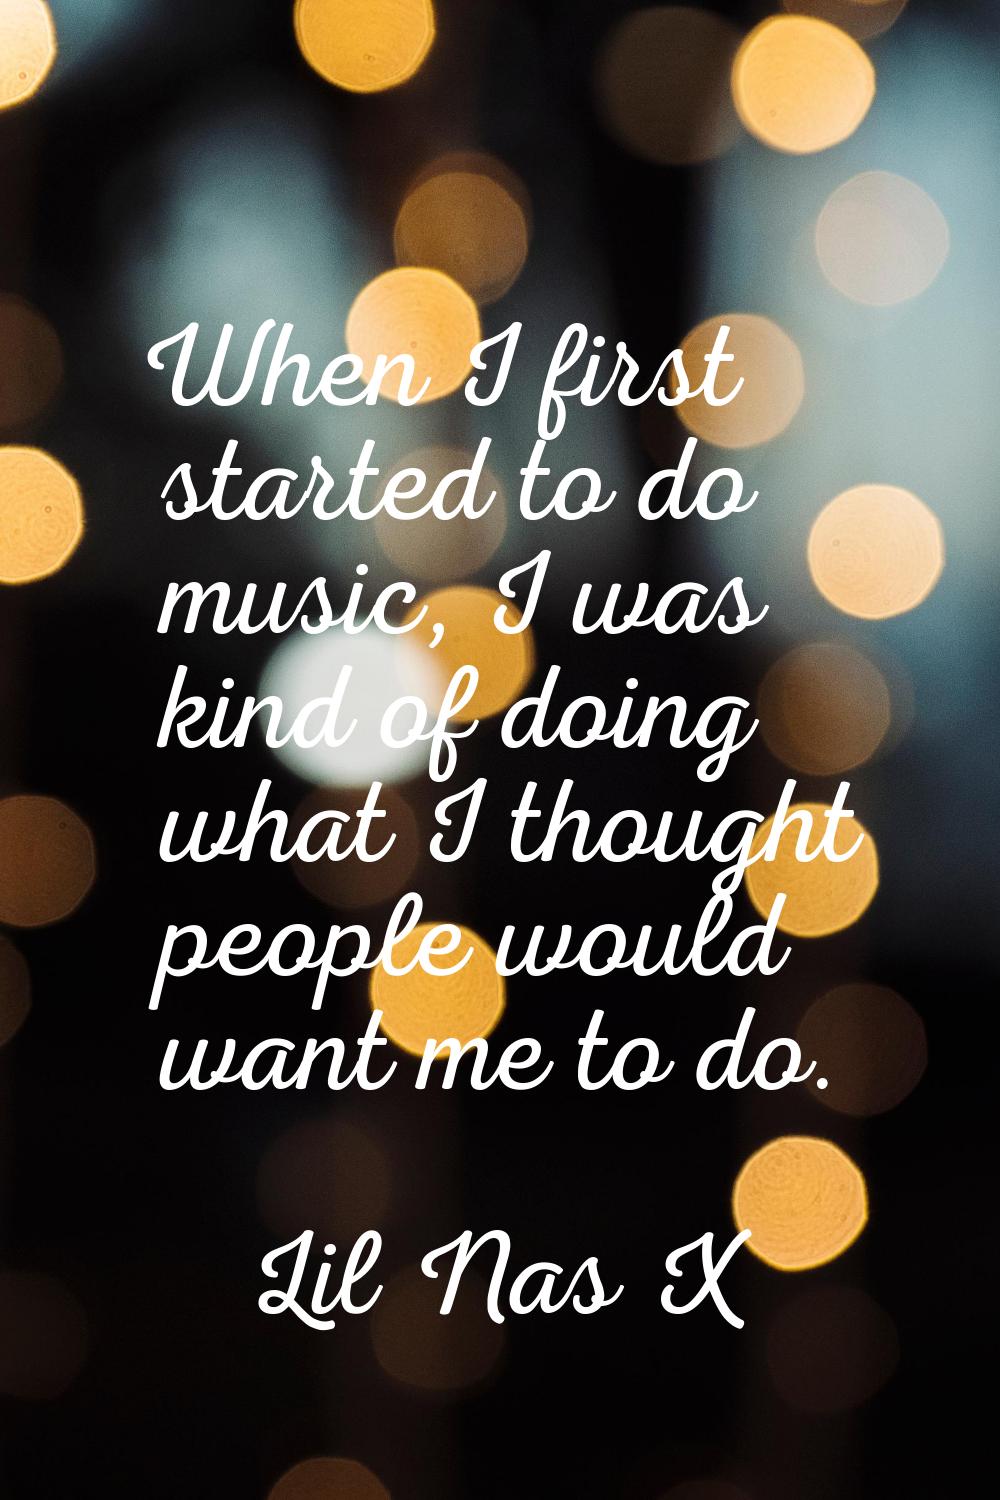 When I first started to do music, I was kind of doing what I thought people would want me to do.